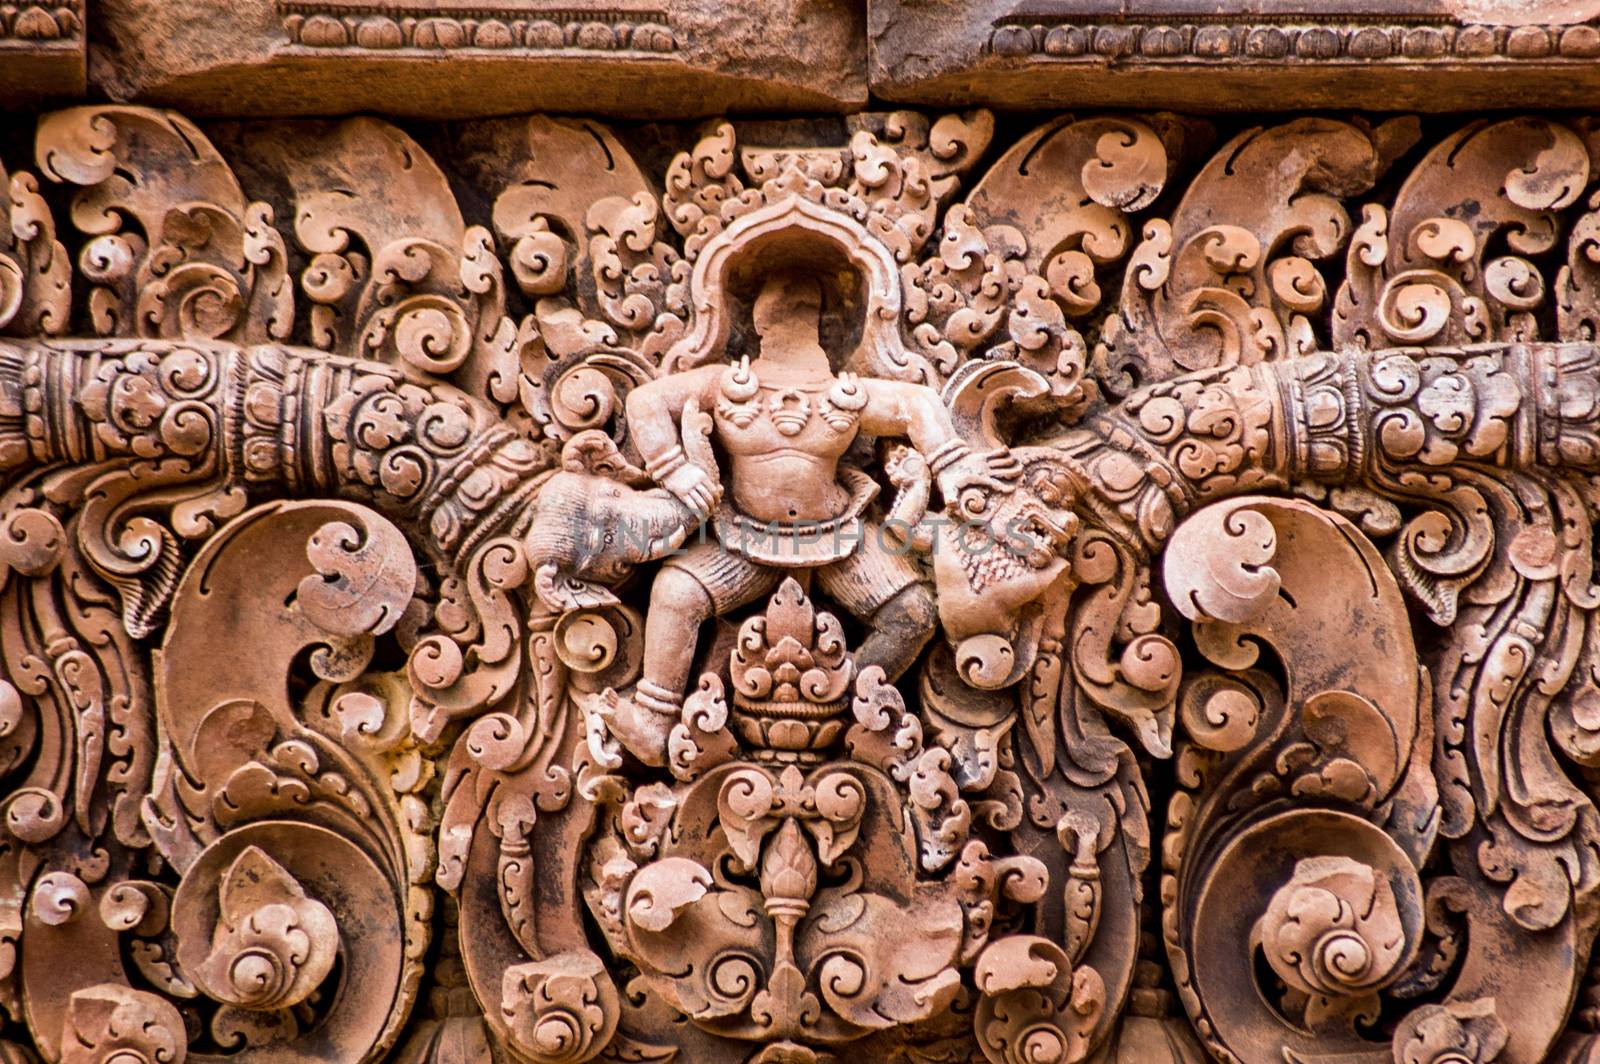 God and Monsters carving, Banteay Srei Temple by BasPhoto